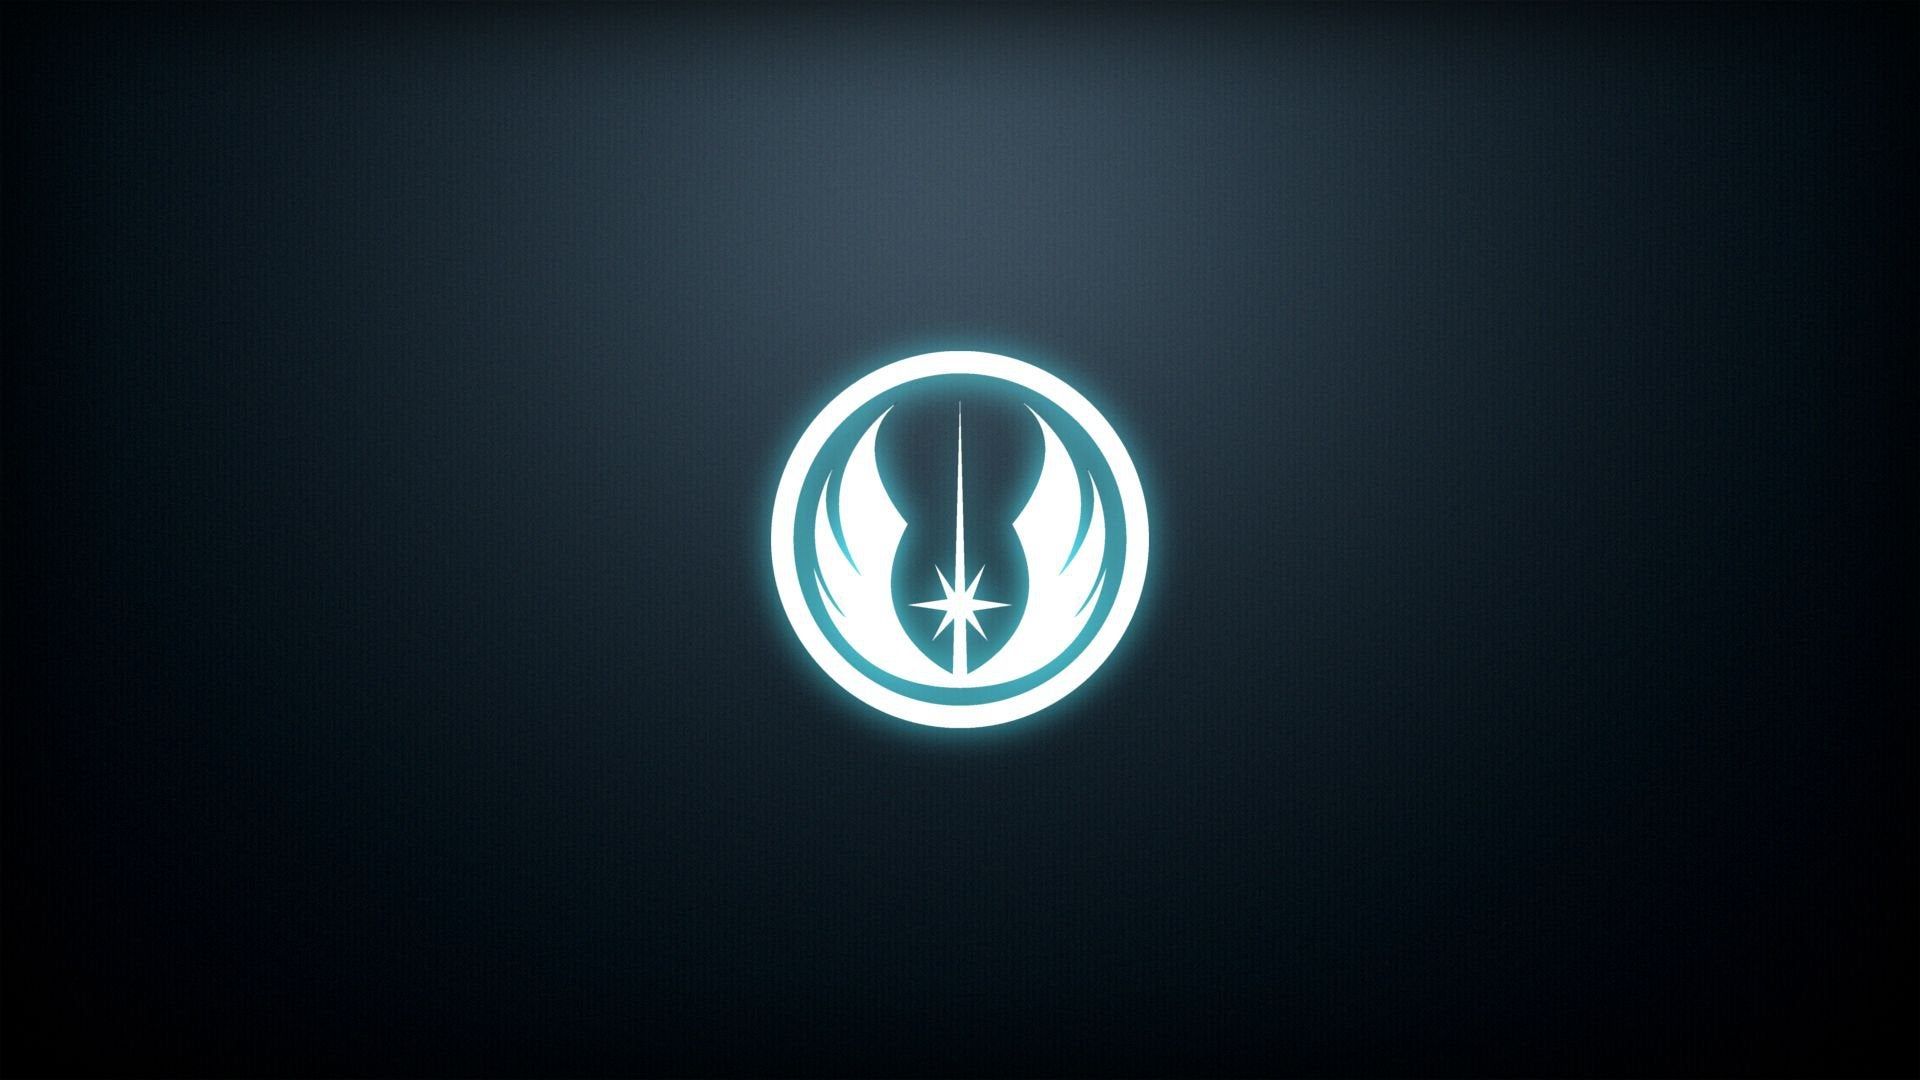 A wallpaper you guys might like. The Jedi Order emblem. I'll do a Sith one too if people want me to. [1920x1080]